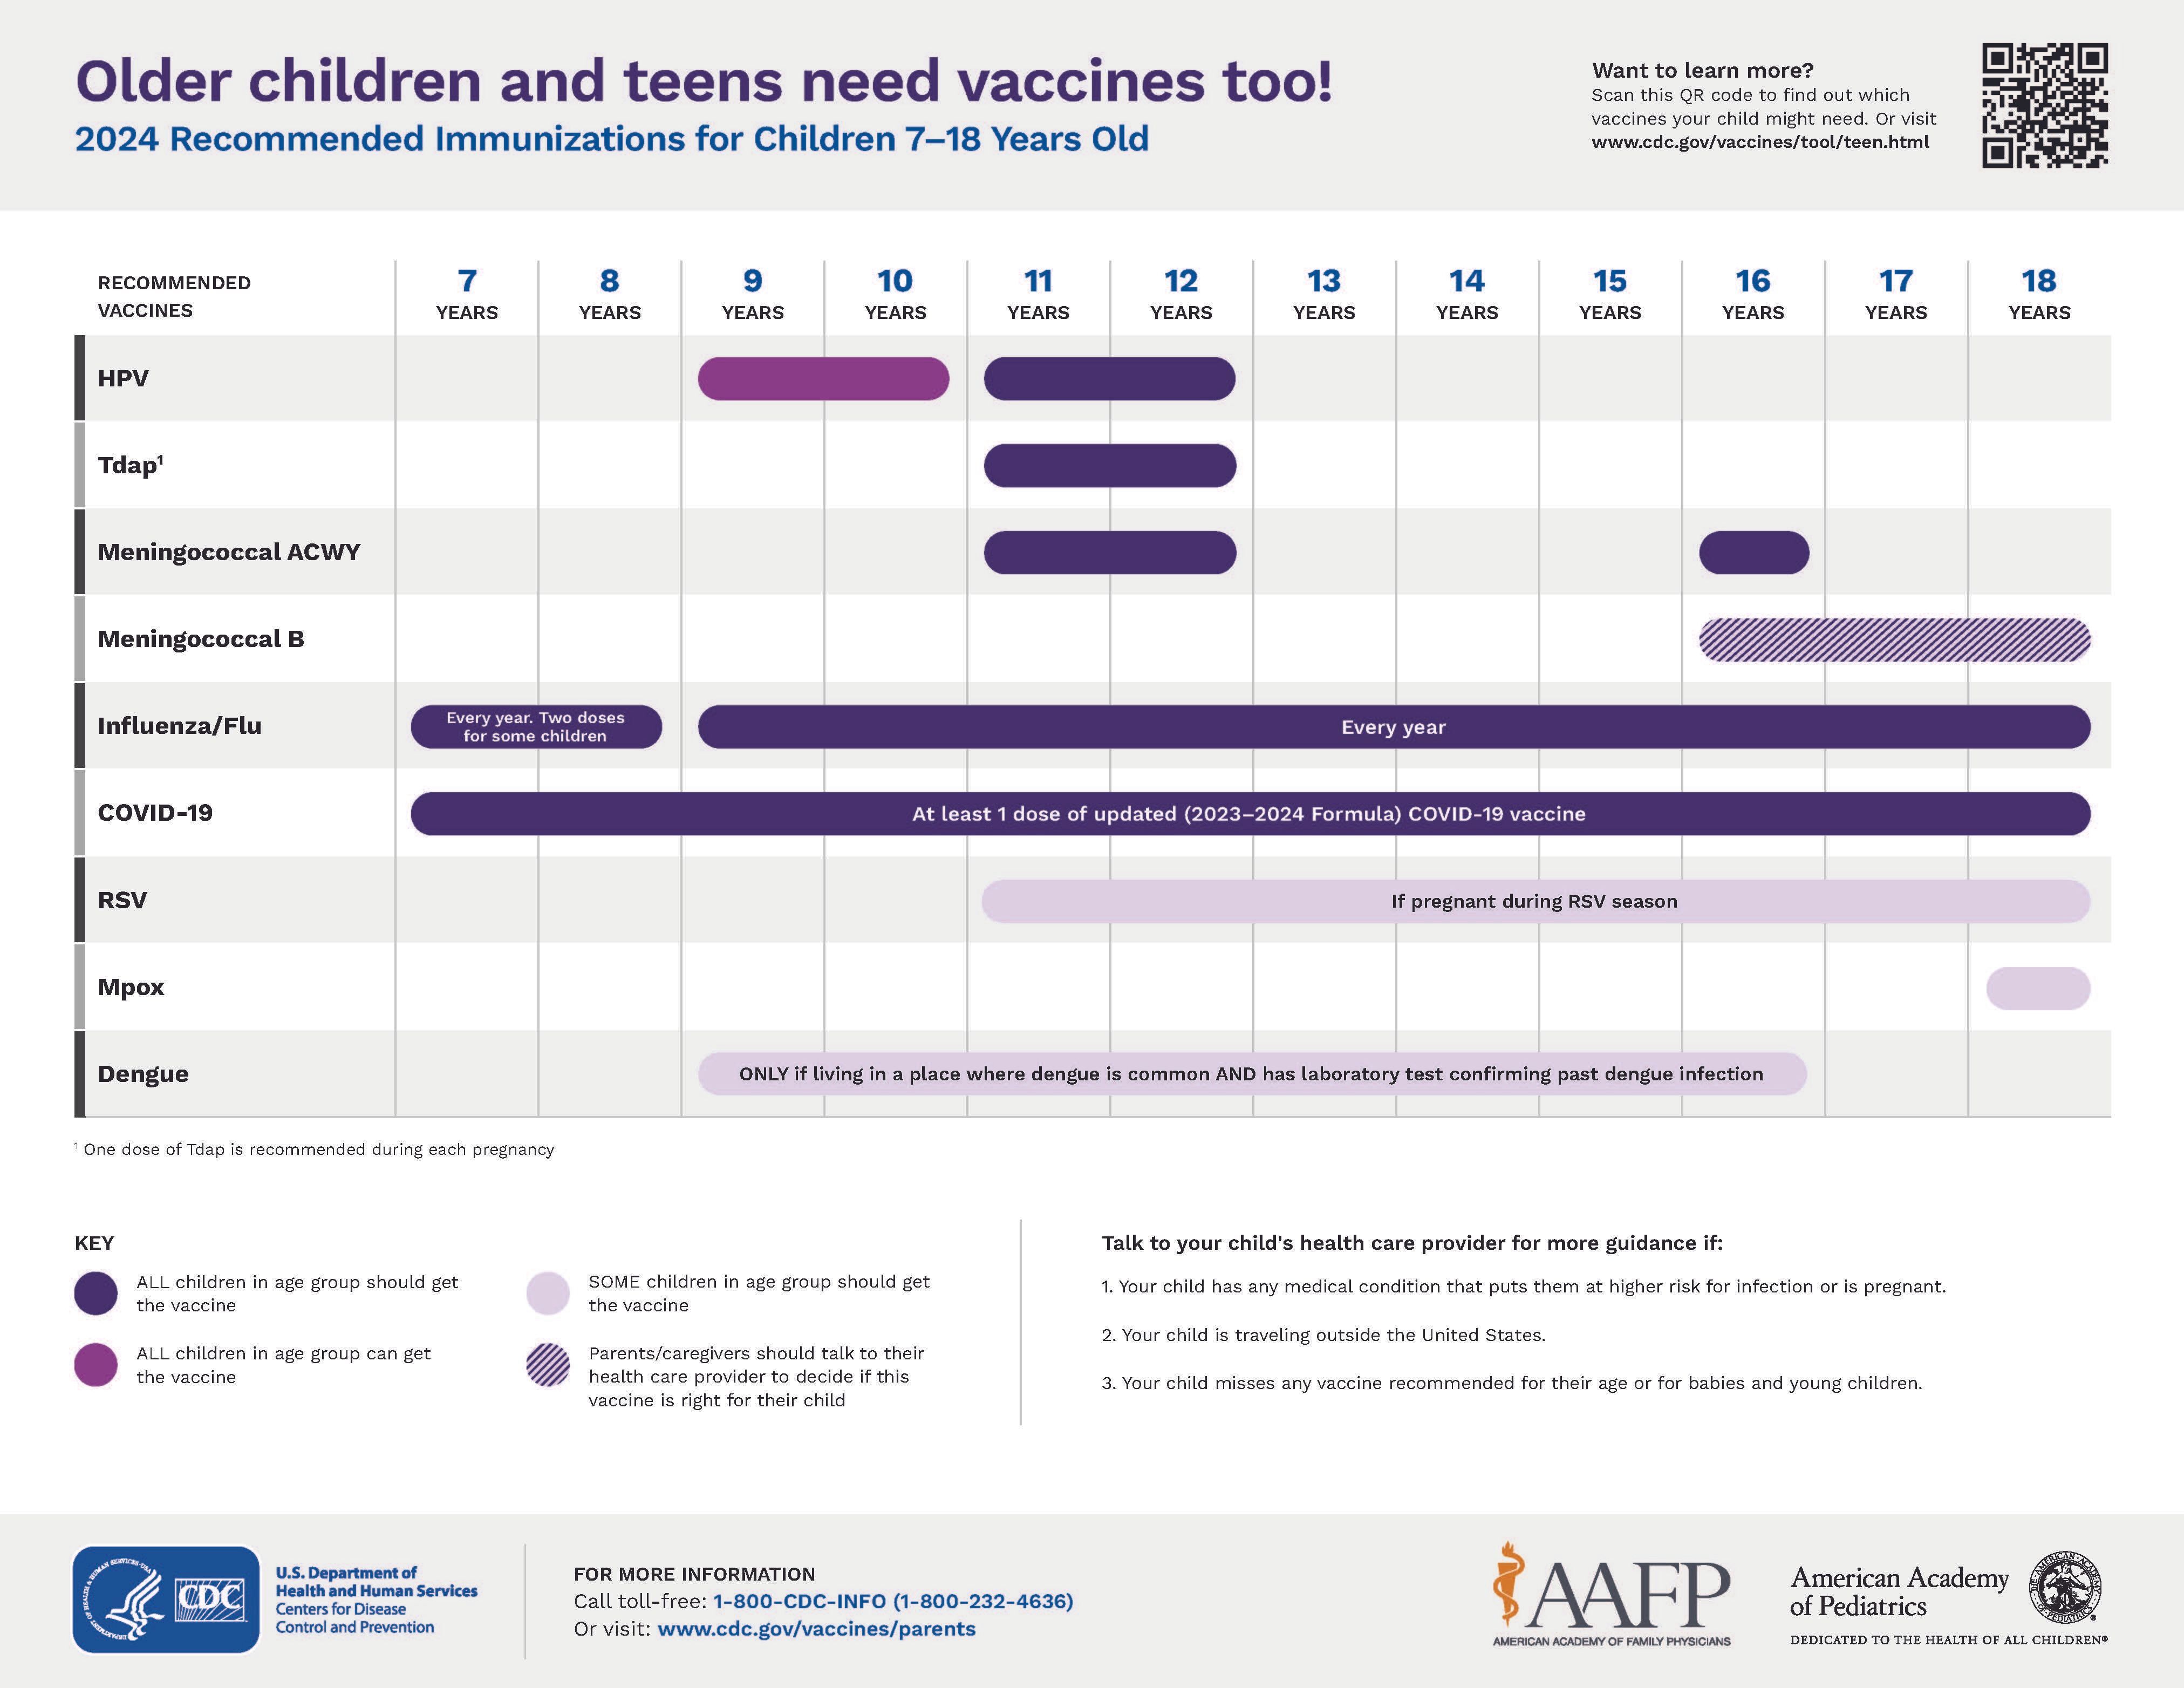 2024 Recommended Immunizations for Ages 7 -18 years old